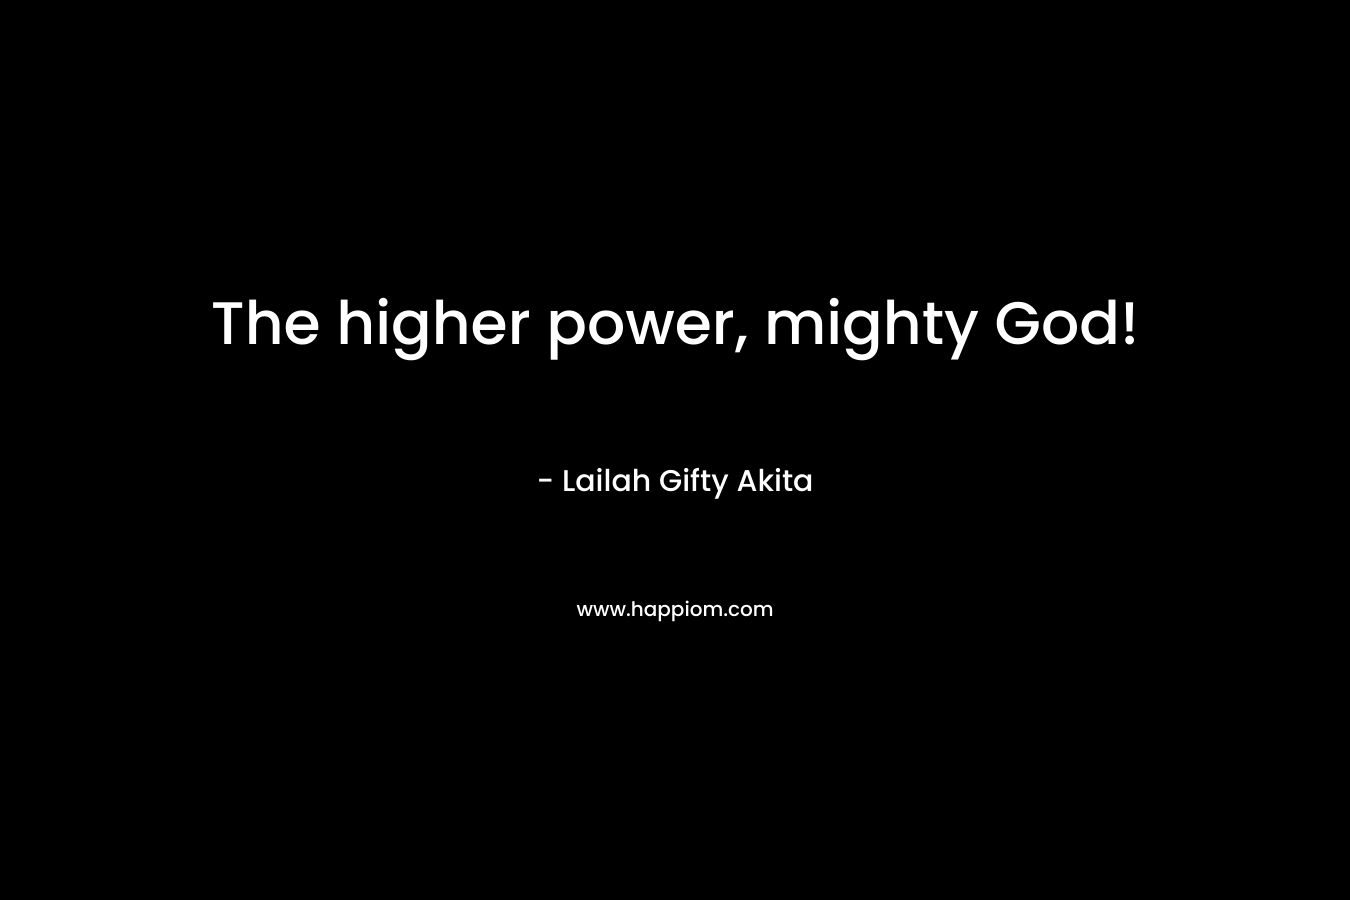 The higher power, mighty God!